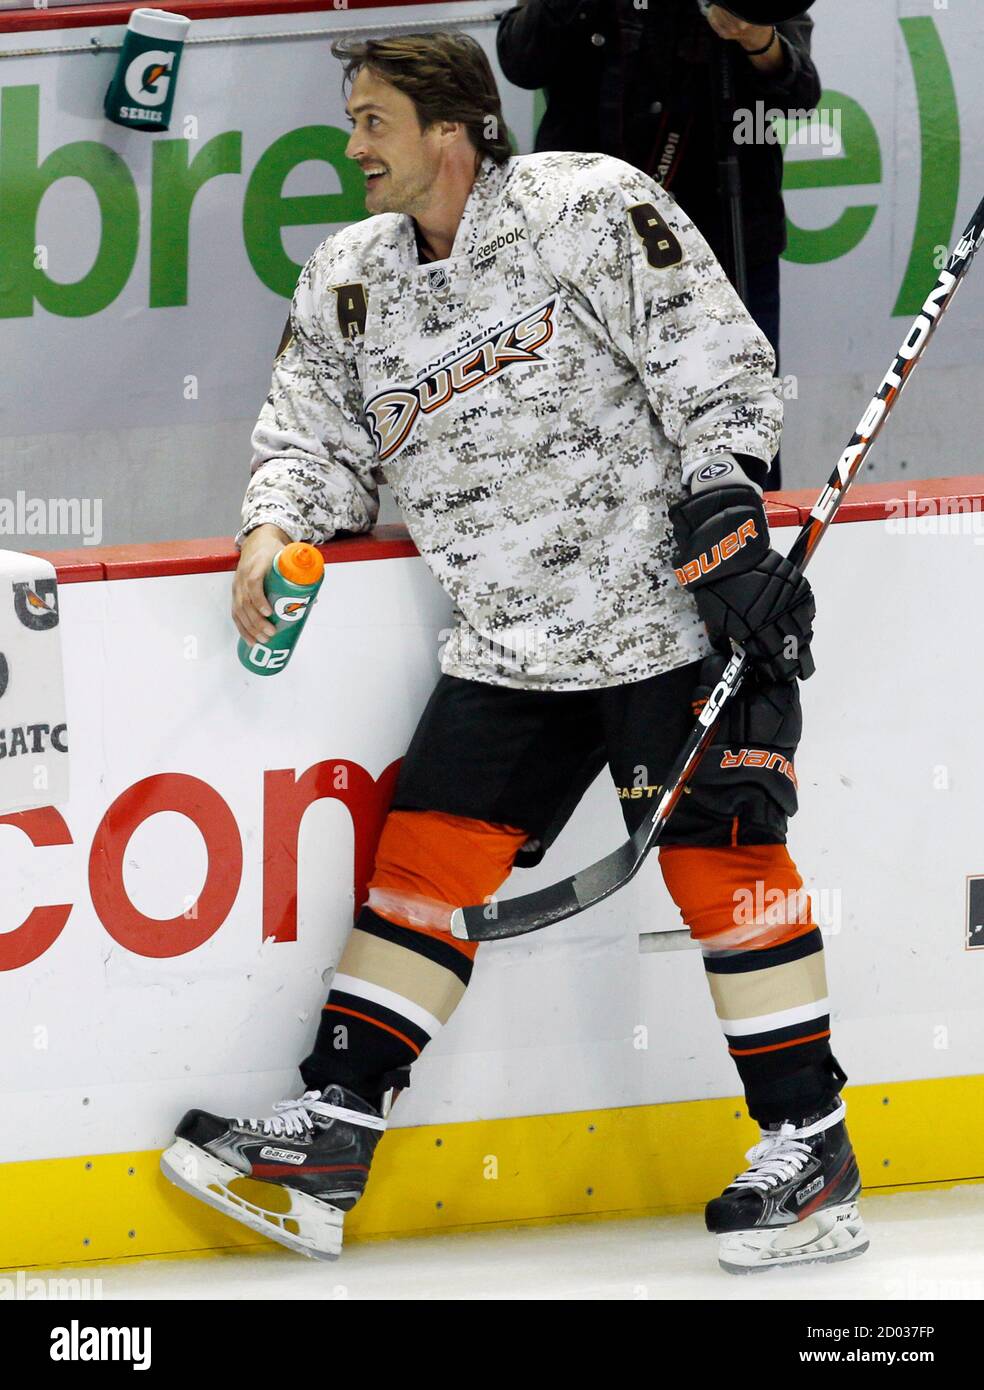 Anaheim Ducks forward Teemu Selanne of Finland wears a camouflage jersey  along with the rest of the team during pre-game warm-ups before their NHL  hockey game against Vancouver Canucks in Anaheim, California